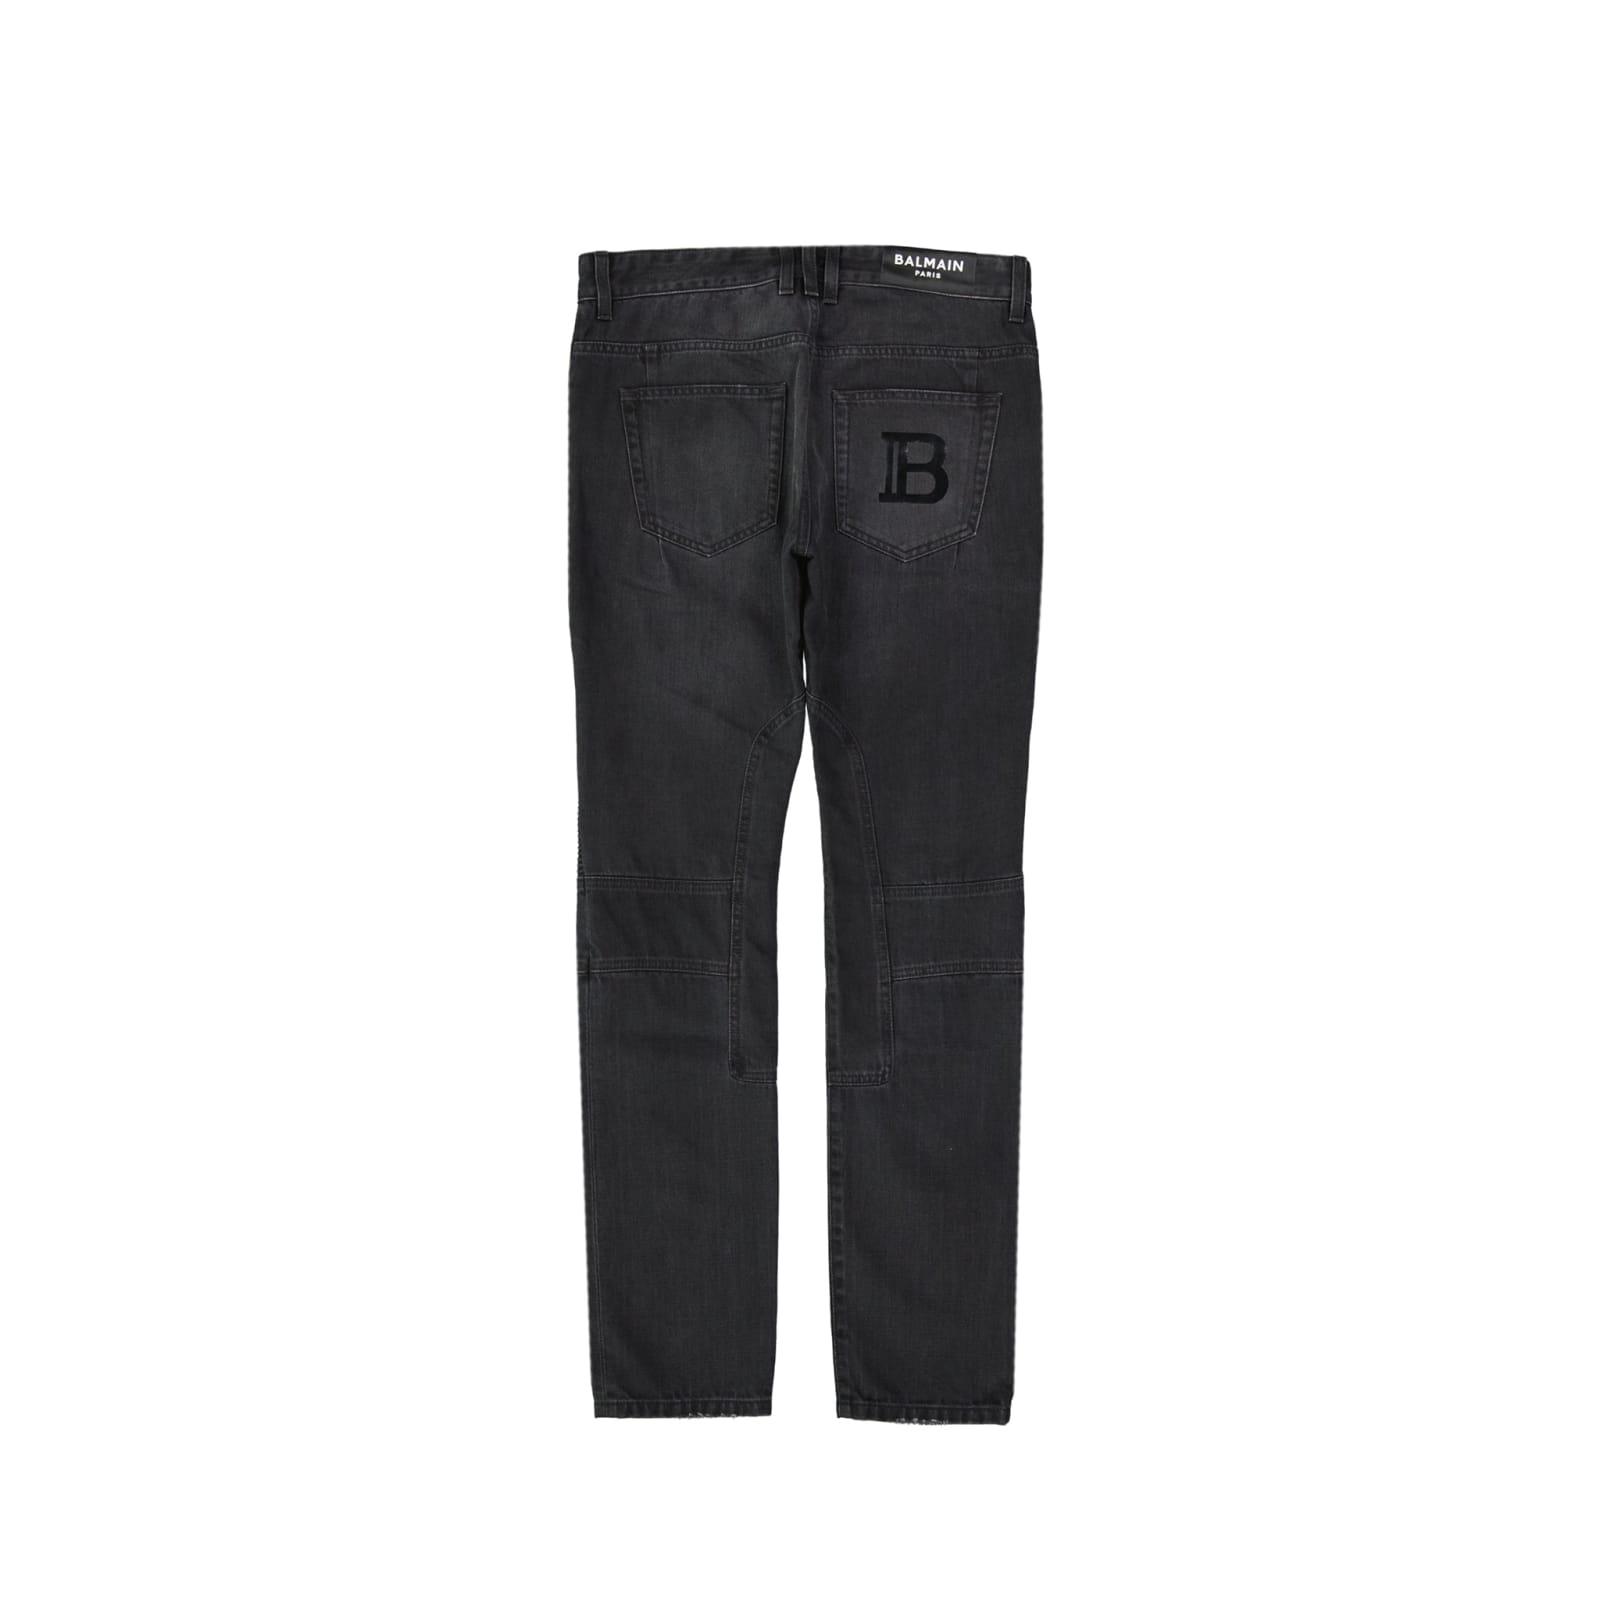 BALMAIN - SLIM FIT COTTON JEANS WITH TEARS AND SYNTHETIC LEATHER PANELS -  Eleonora Bonucci